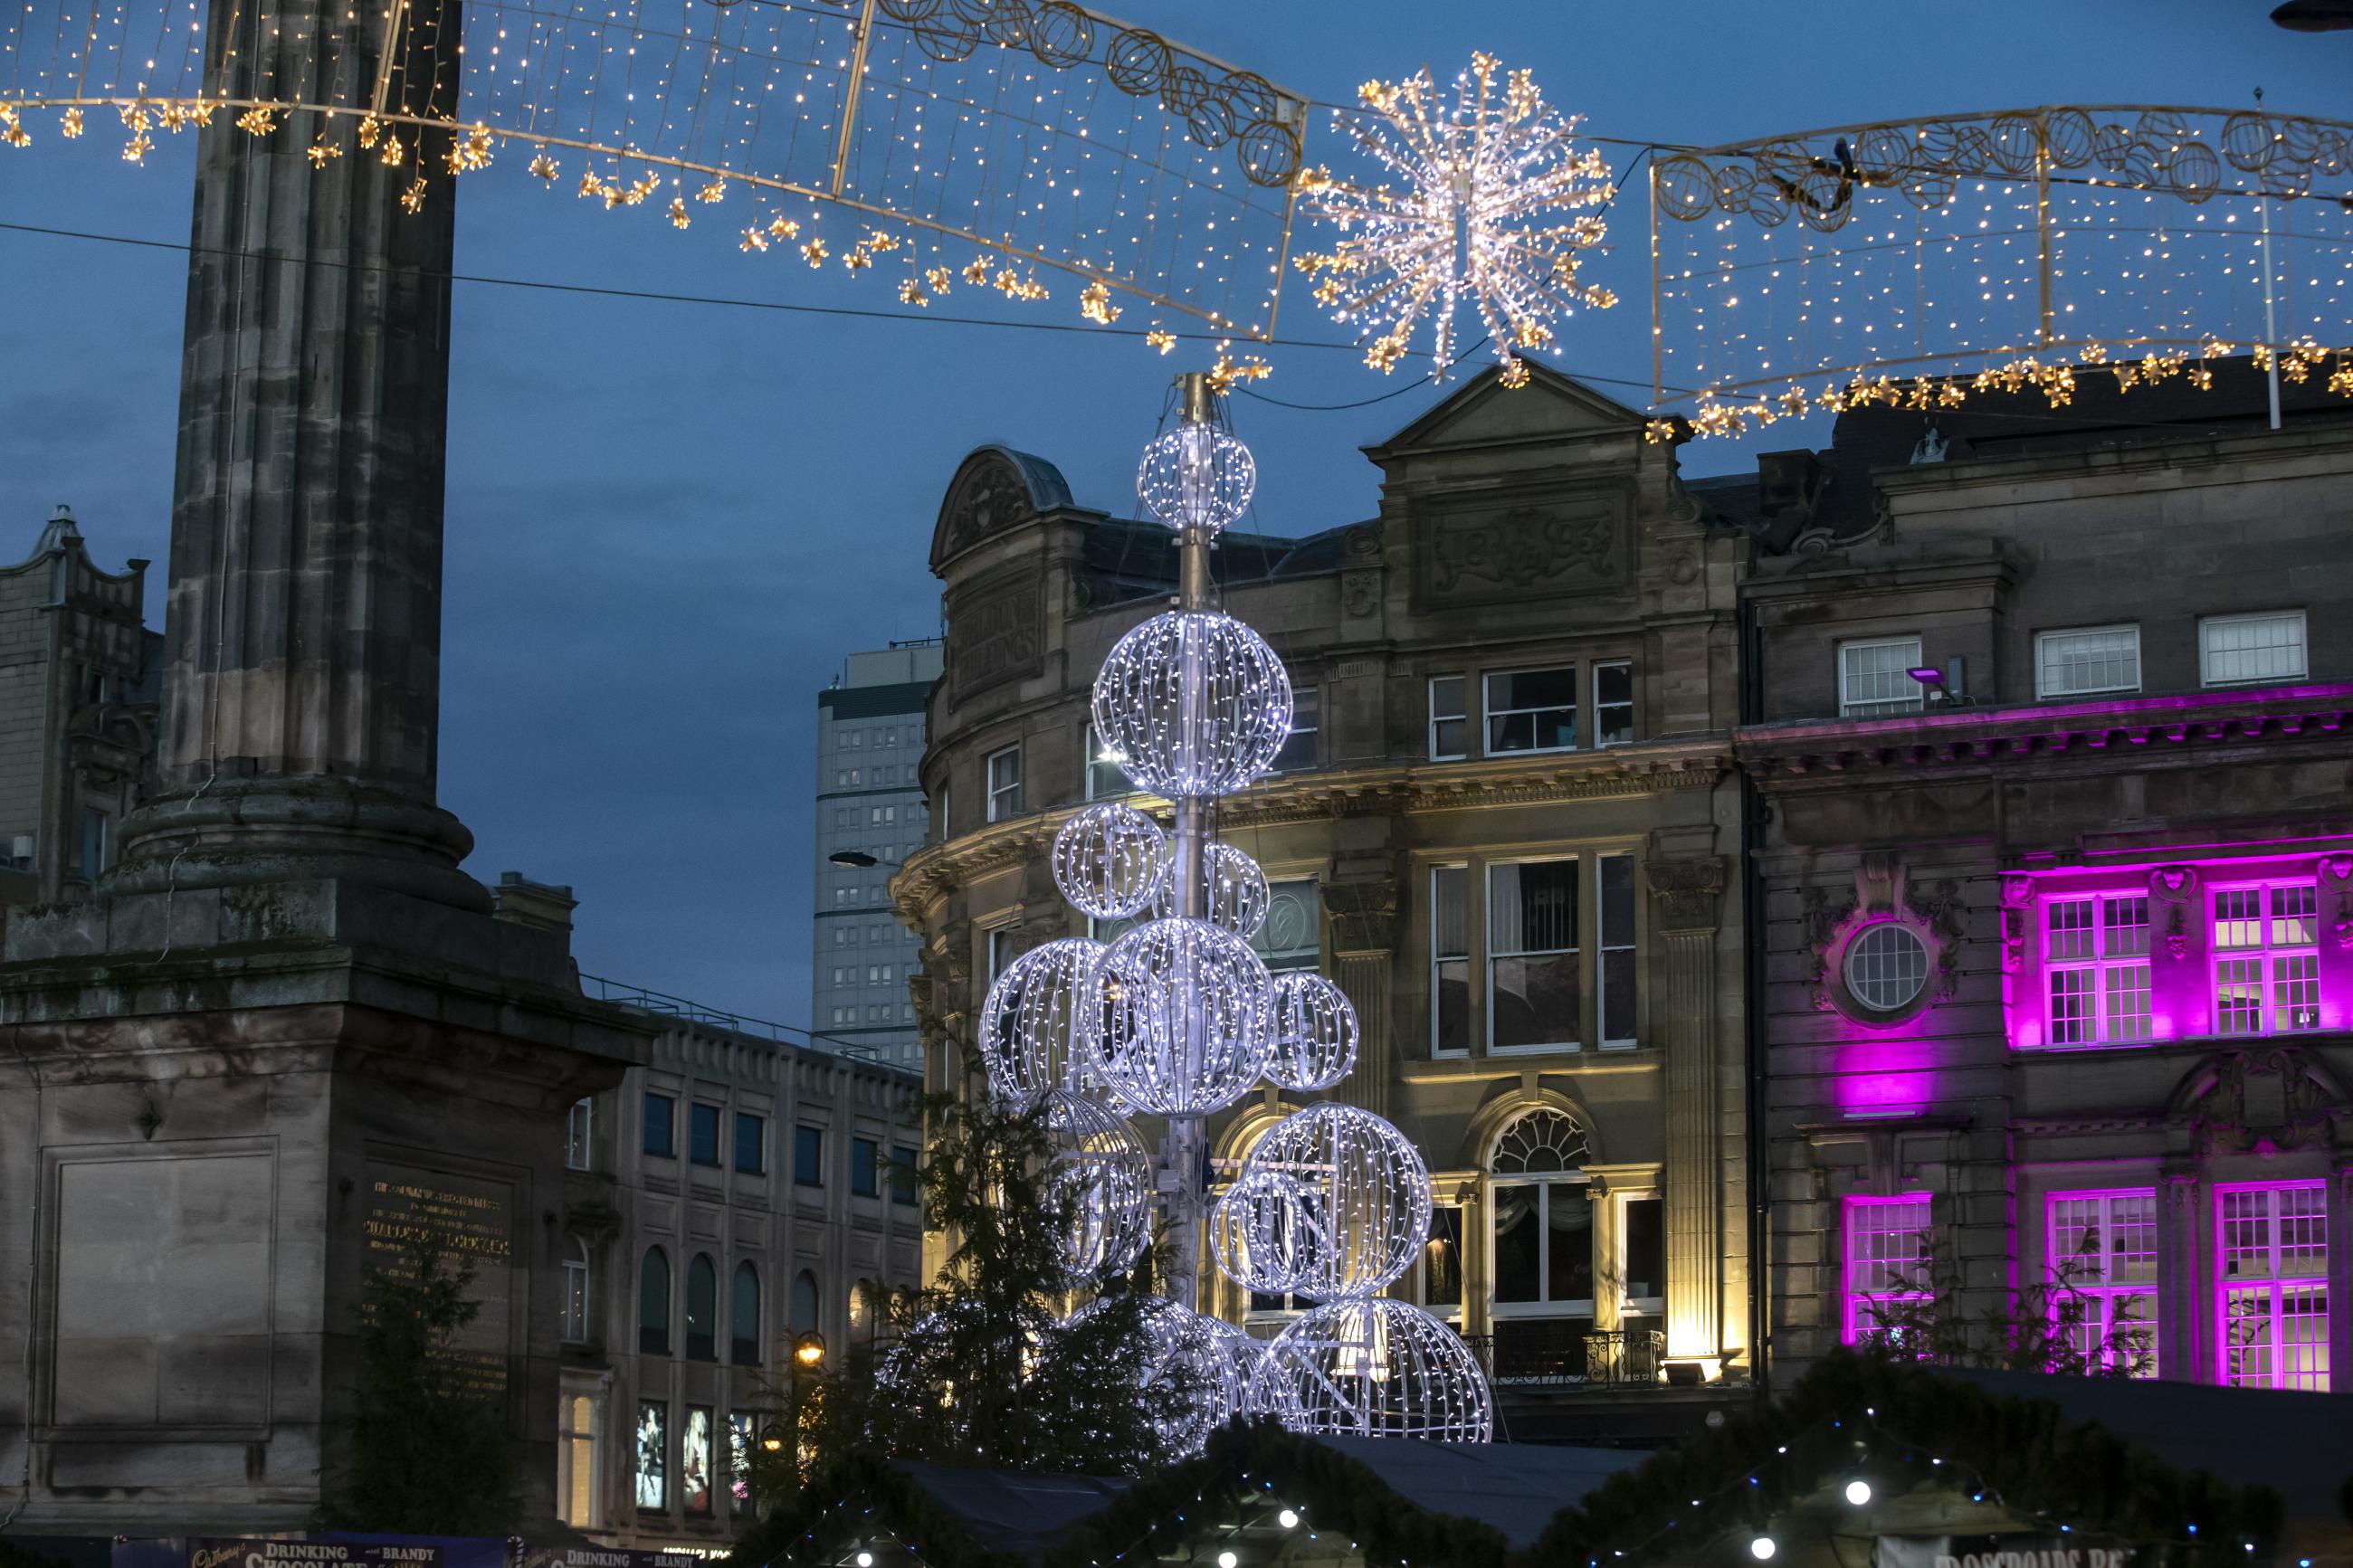 Festive plans for Newcastle’s Christmas revealed Newcastle City Council